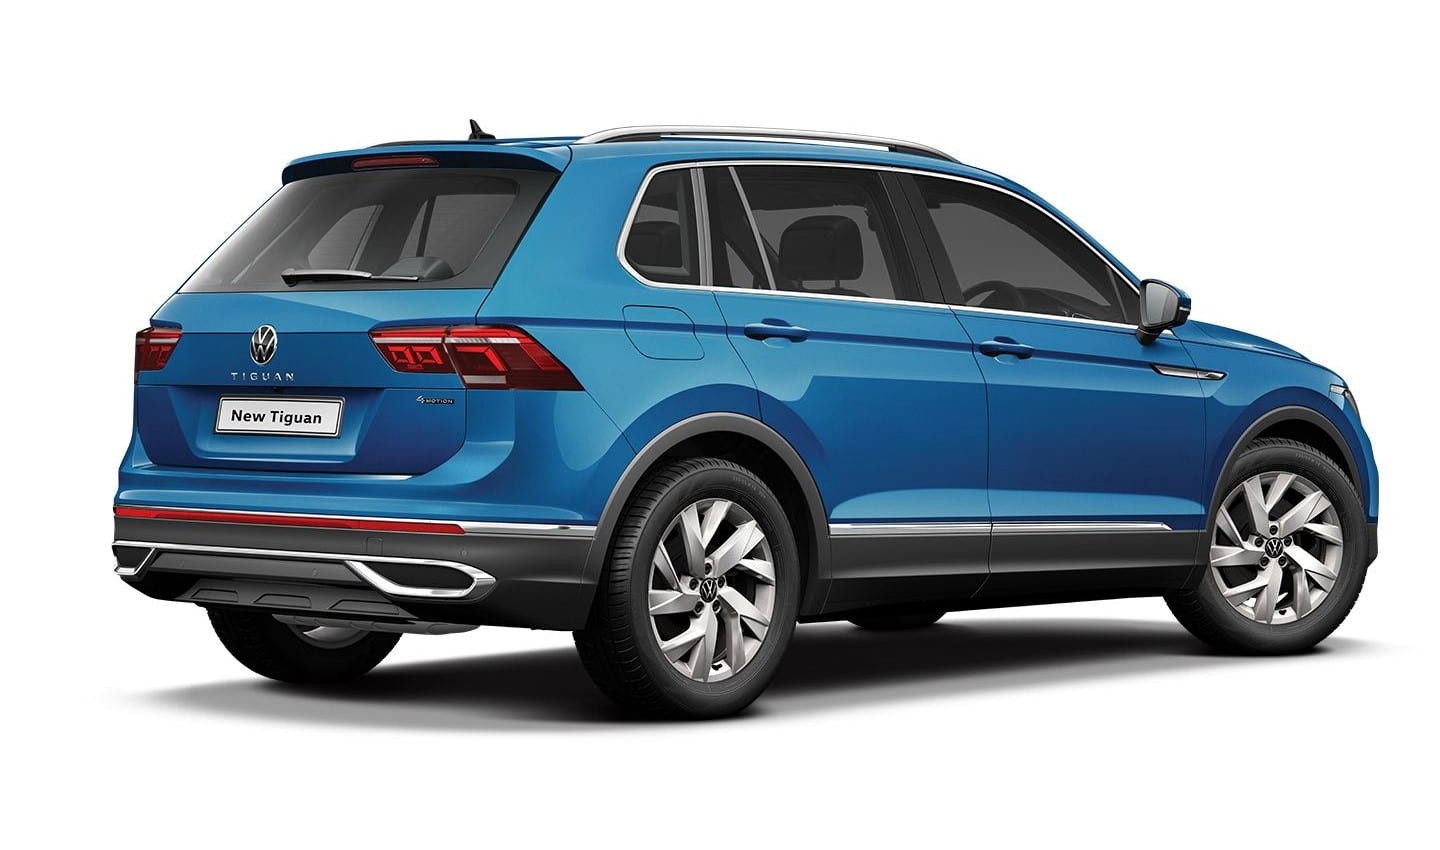 The Volkswagen Tiguan is already produced in India